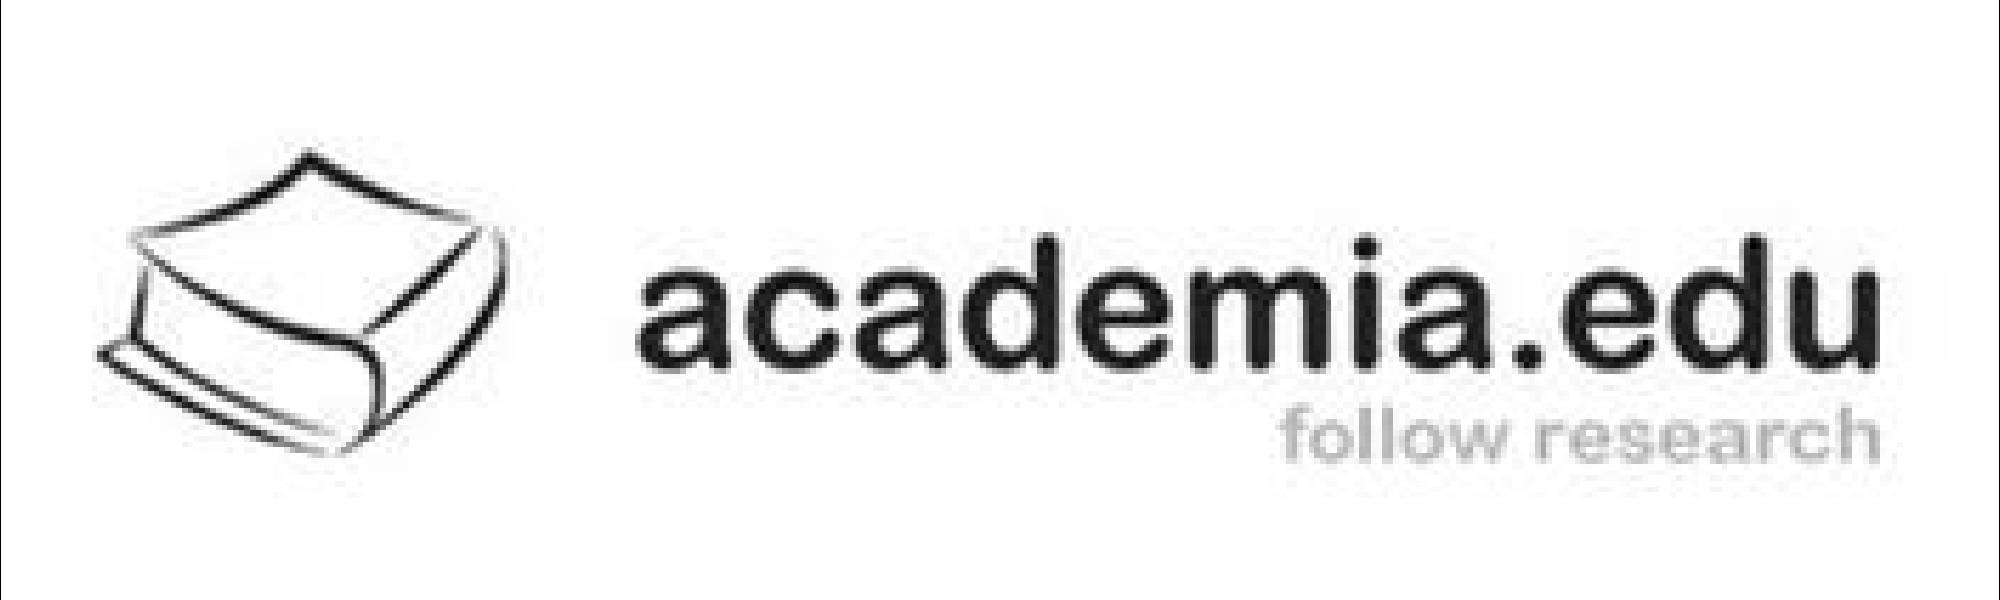 Image result for academia